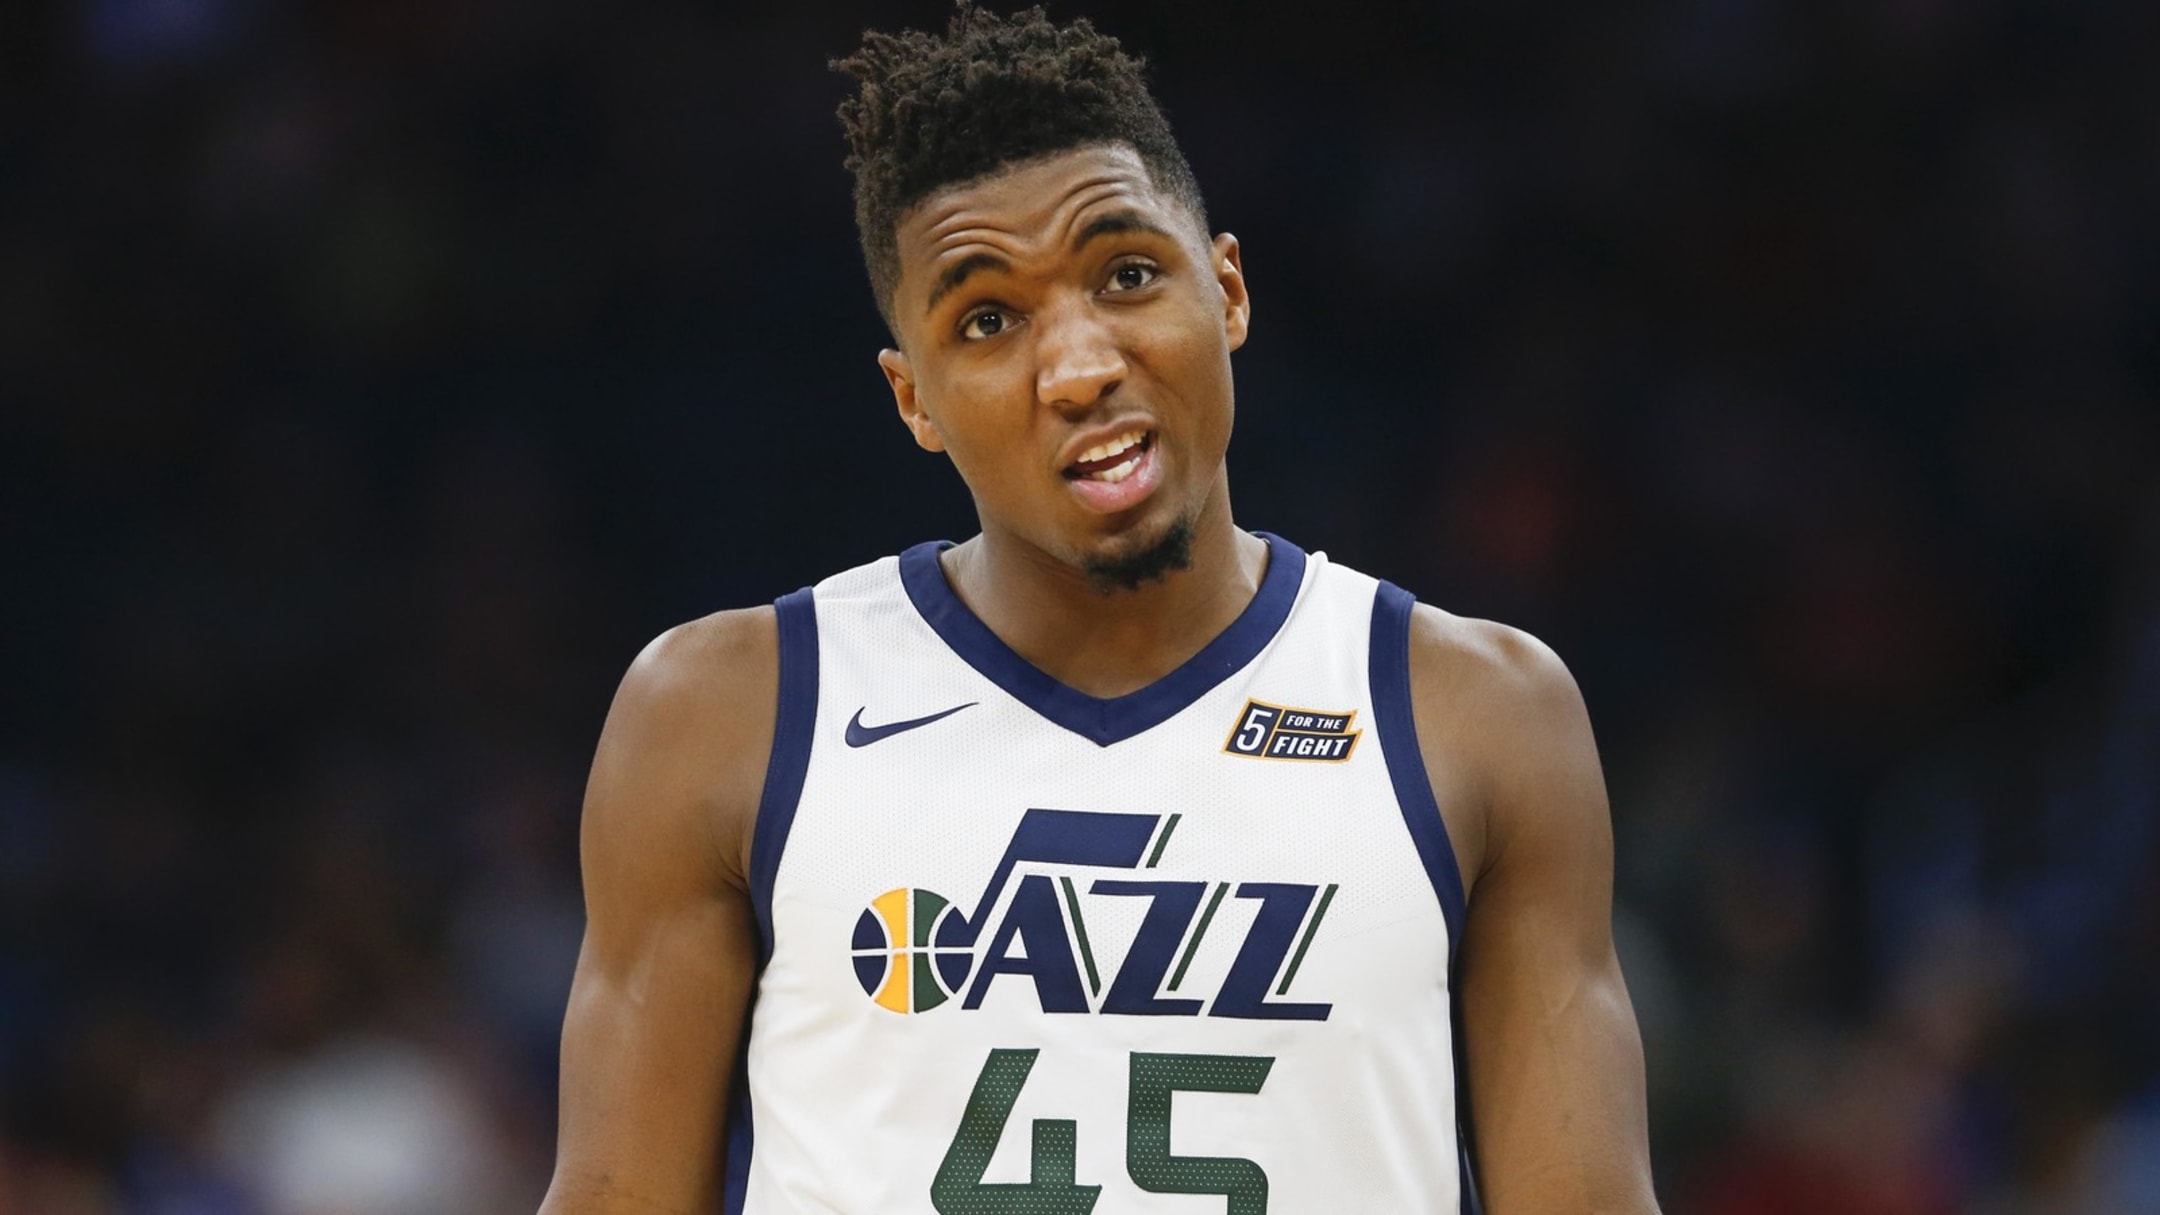 Utah's Donovan Mitchell isn't just playing point guard. He's